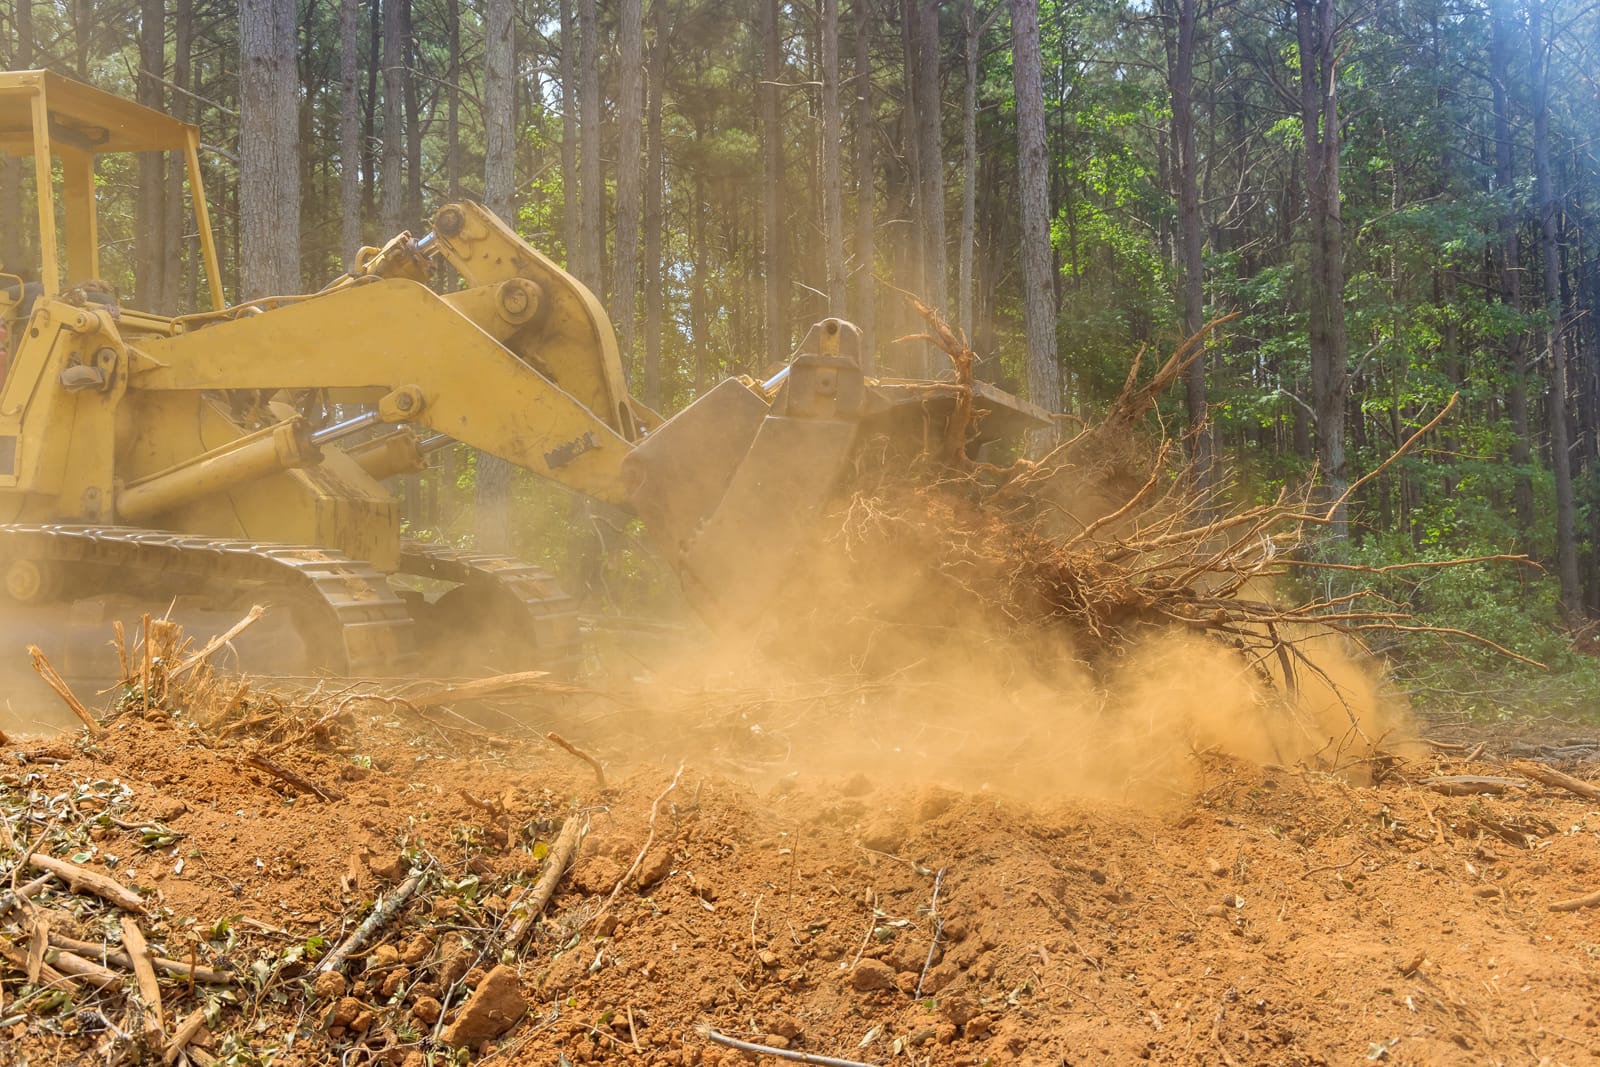 A powerful bulldozer efficiently clears land in the woods